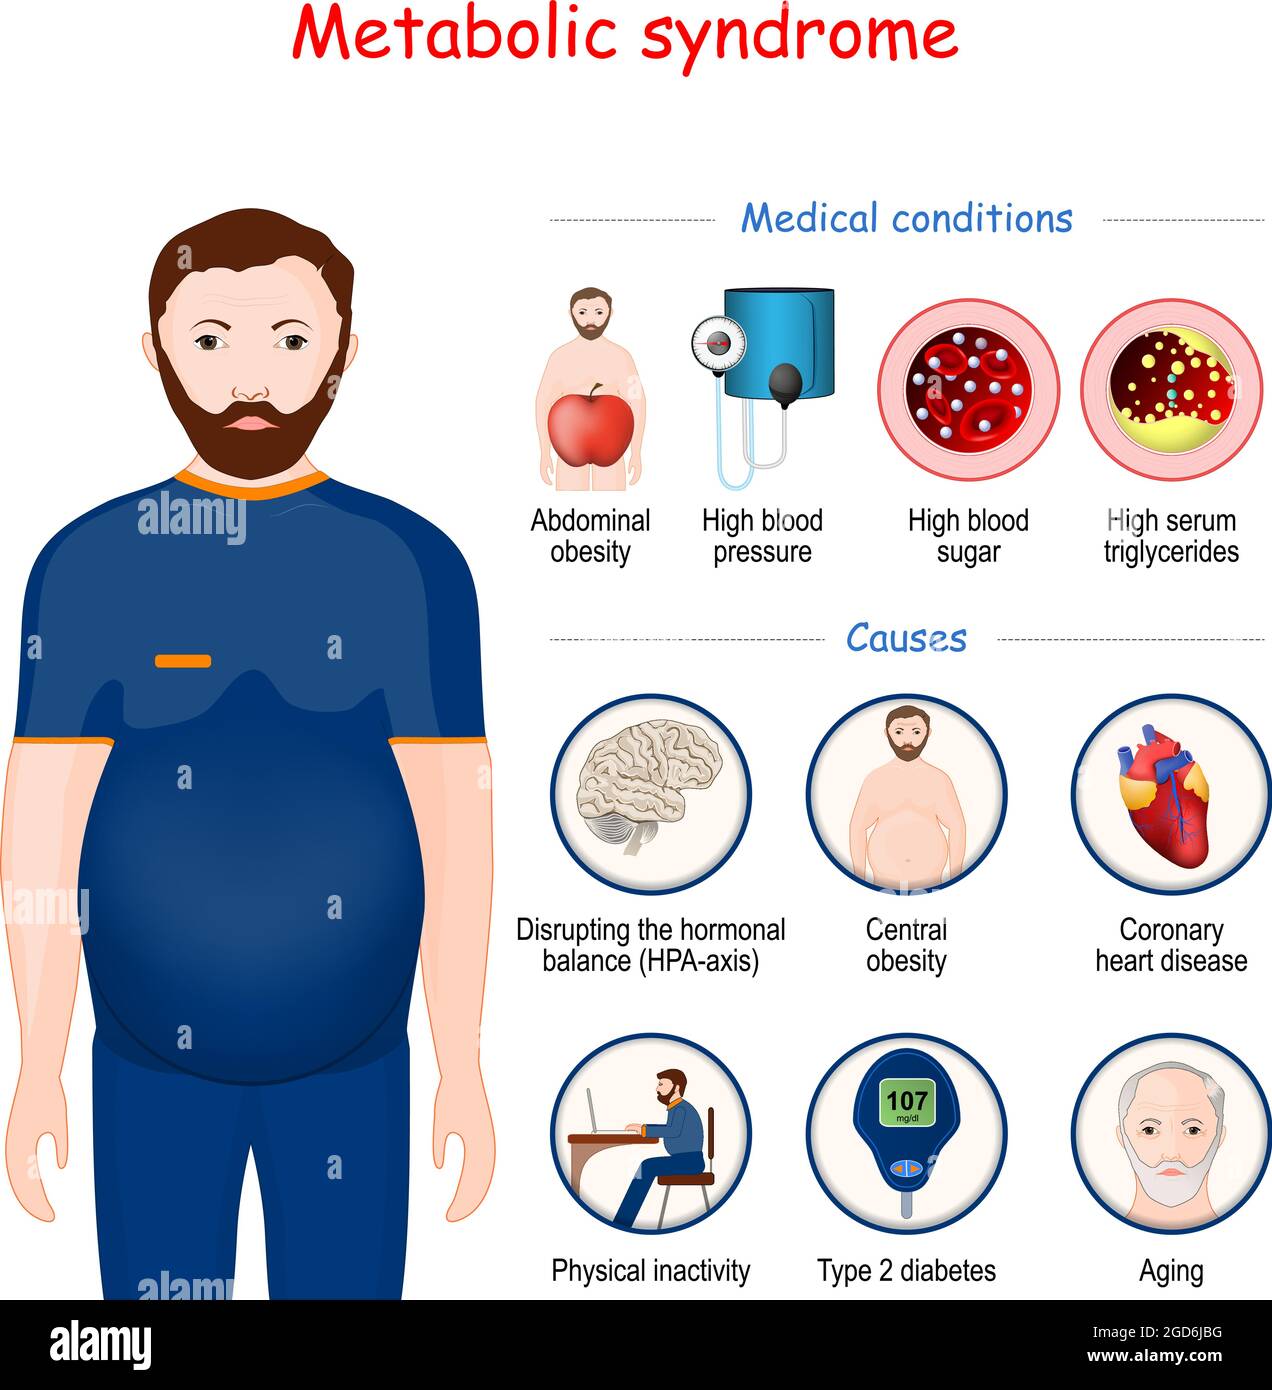 Metabolic syndrome. Causes and Medical conditions infographic. Human's metabolism.  Man with Abdominal obesity. Vector illustration Stock Vector